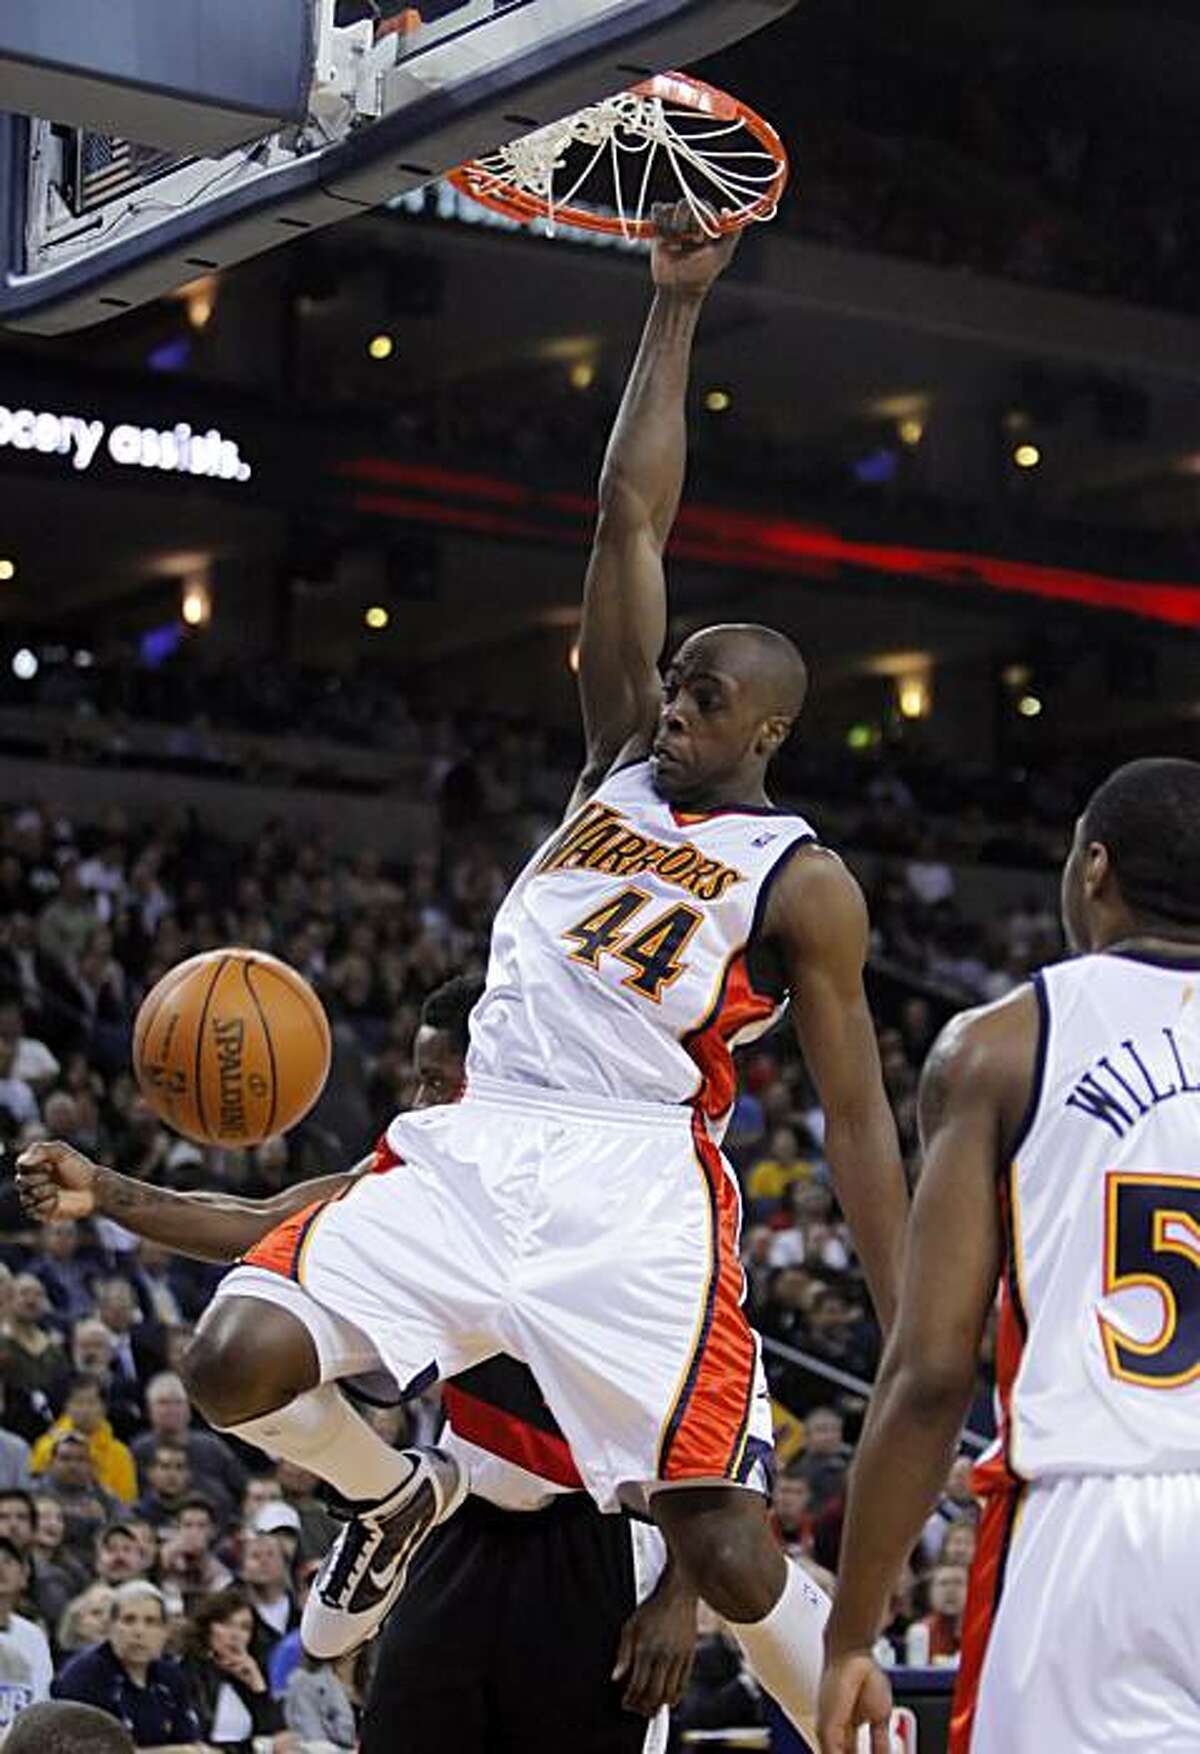 Anthony Tolliver dunks in the first half. The Golden State Warriors played the Portland Trail Blazers at Oracle Pavilion in Oakland, Calif., on March 11, 2010.